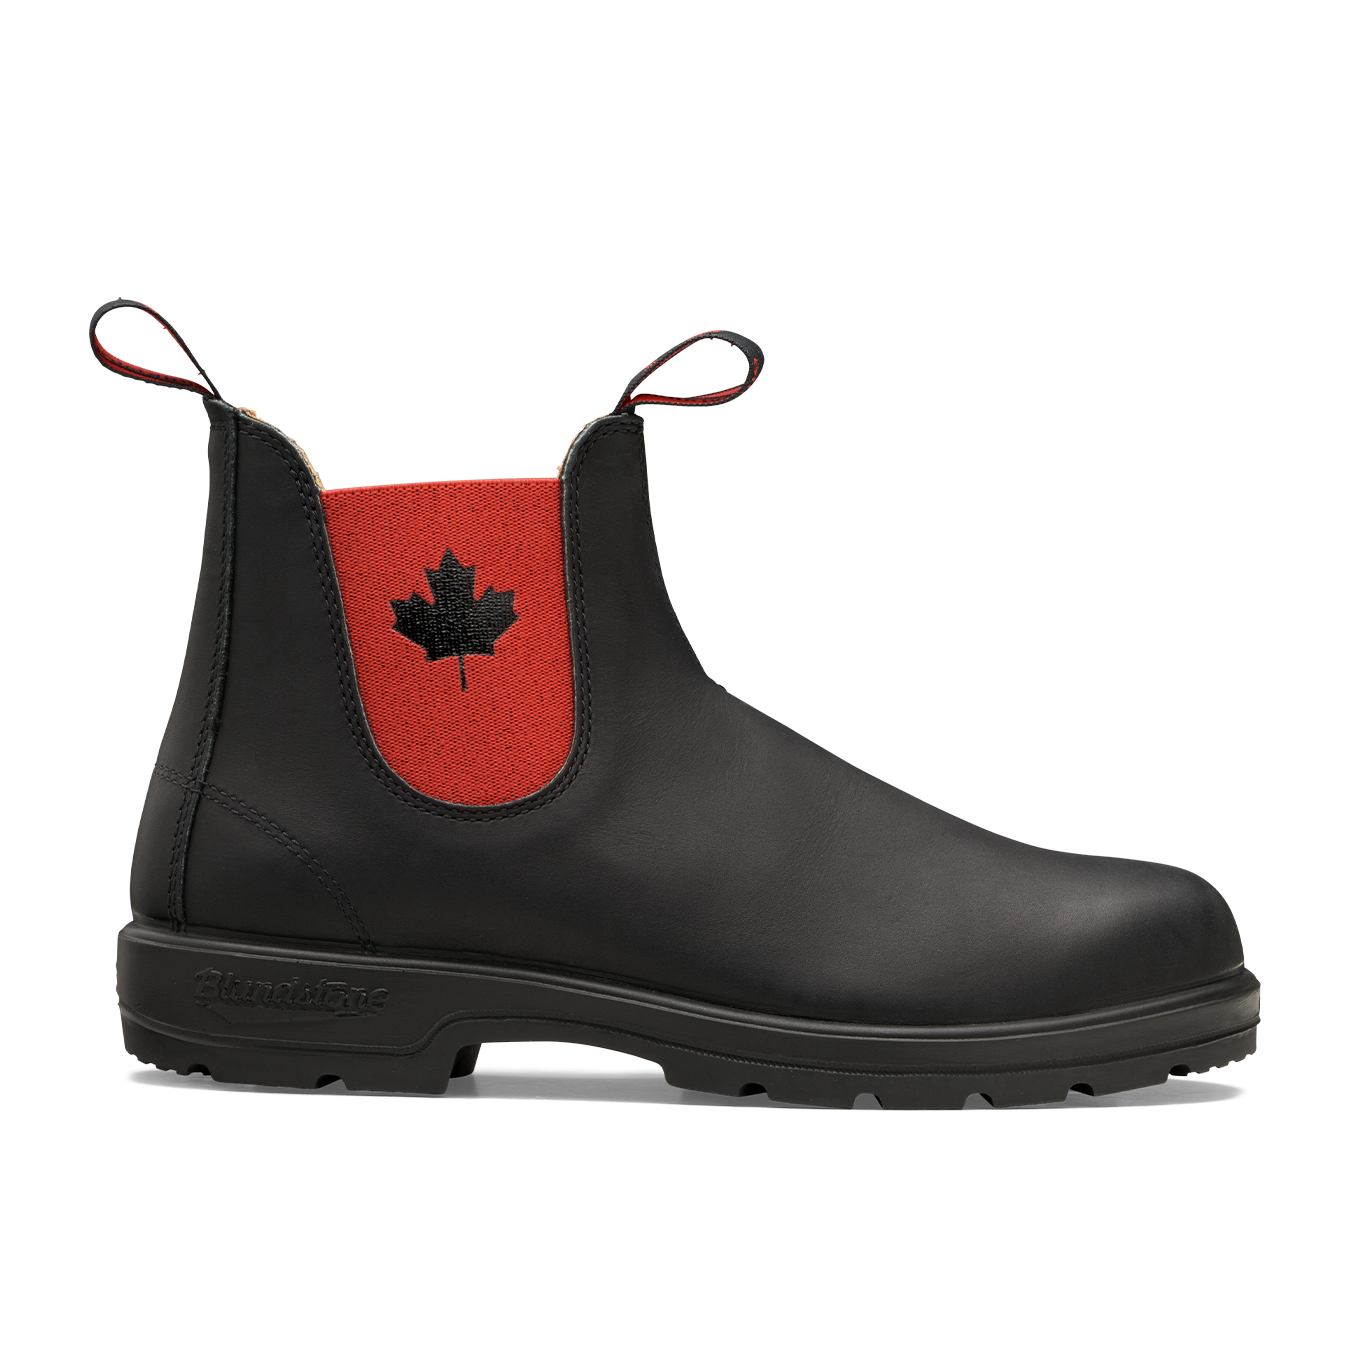 Blundstone #1474 - The Canada 'Eh!' Boot